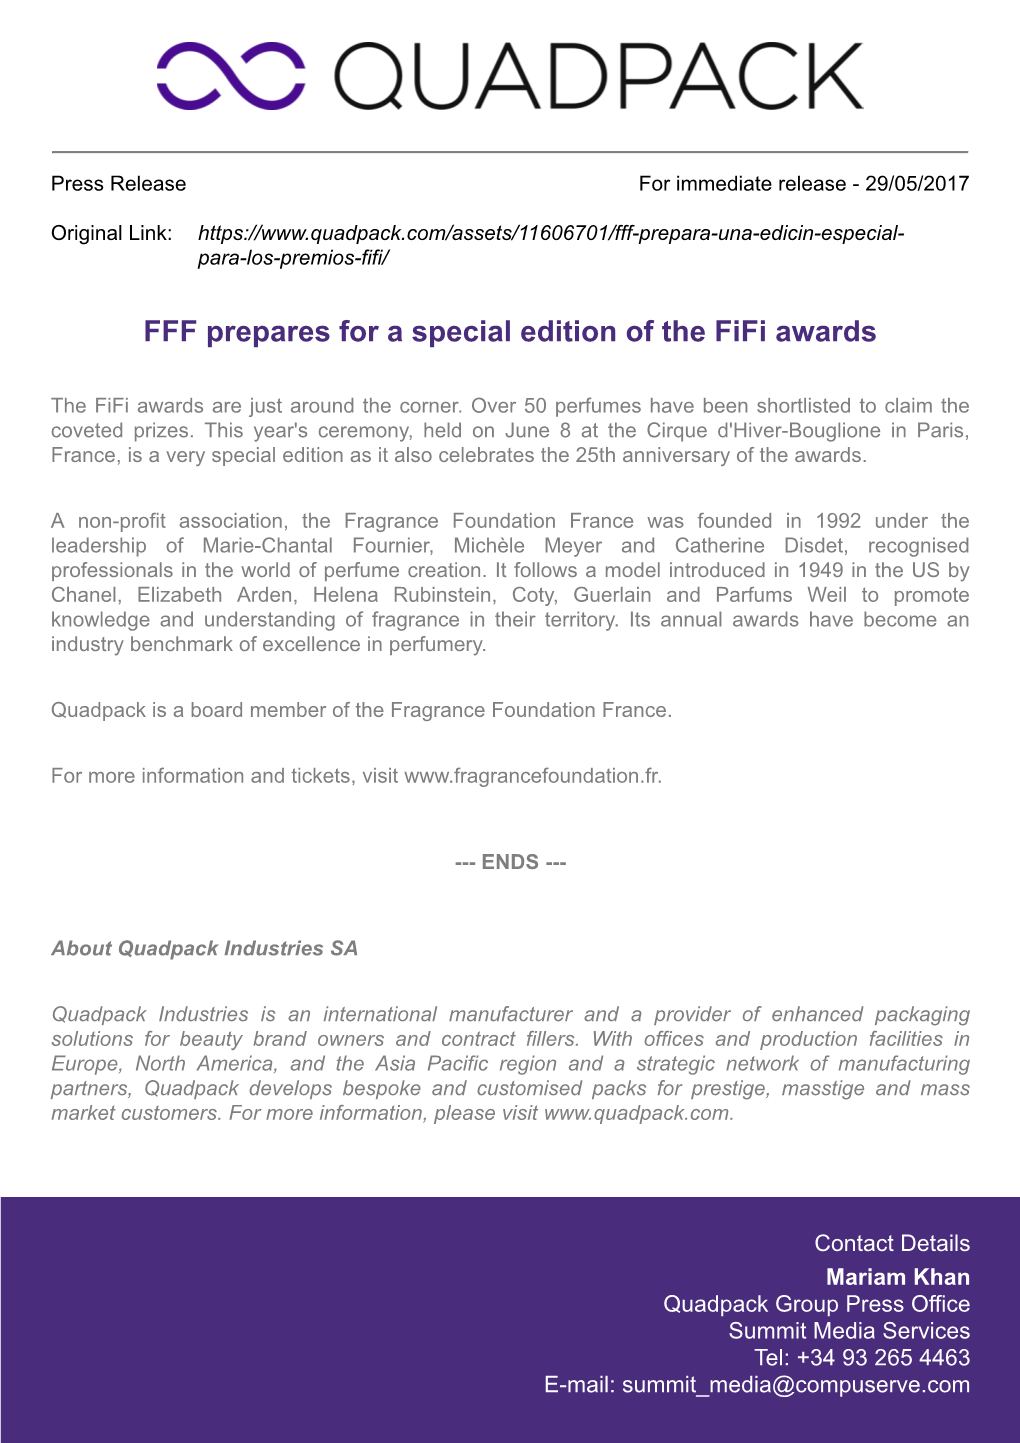 FFF Prepares for a Special Edition of the Fifi Awards